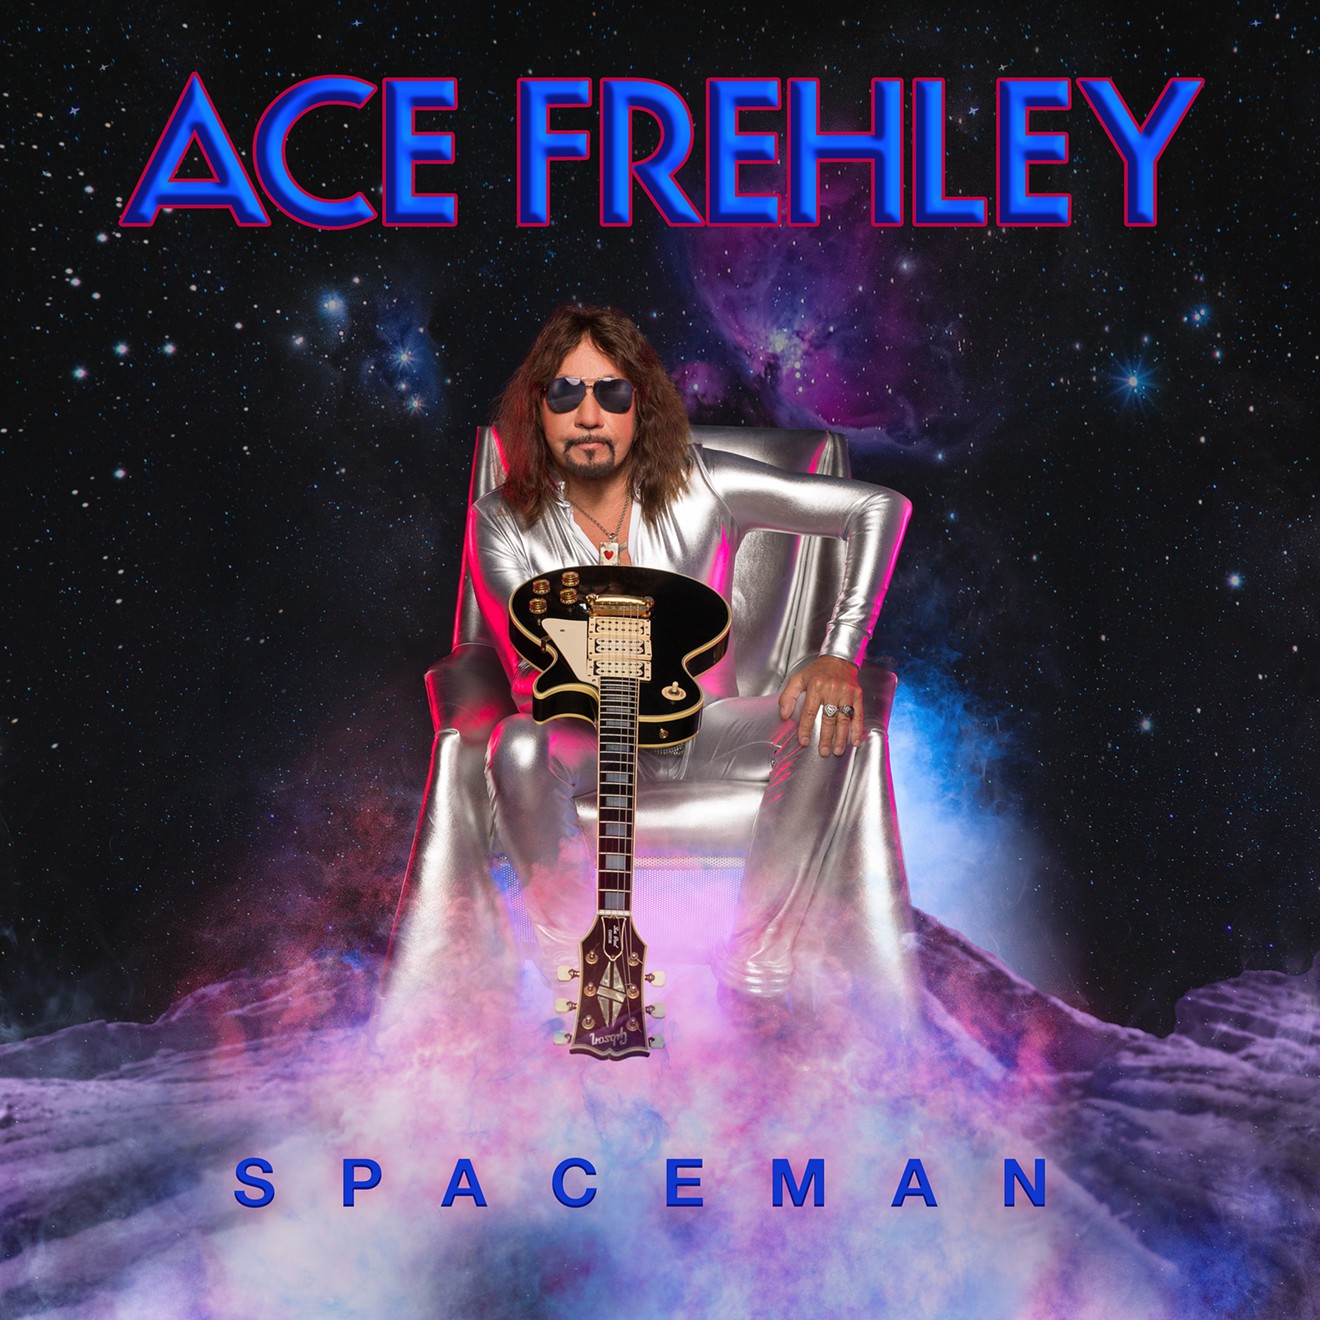 The cover of Ace Frehley's new solo album, Spaceman.